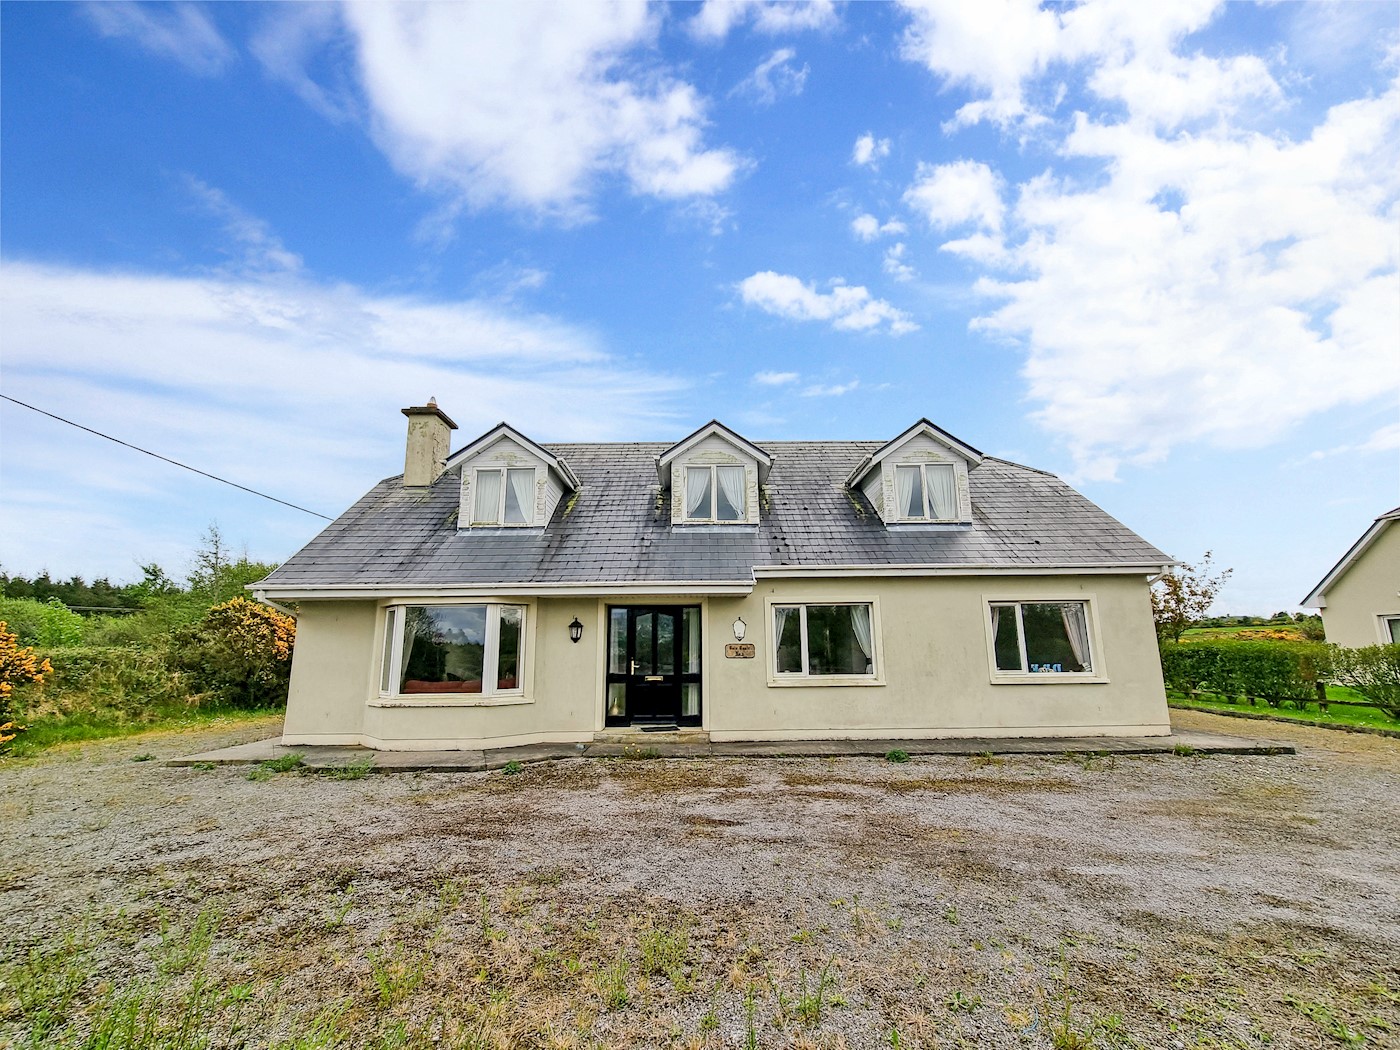 1 Cois na Cnoc, Rathmore, Co. Kerry, P51 Y3E0 1/23